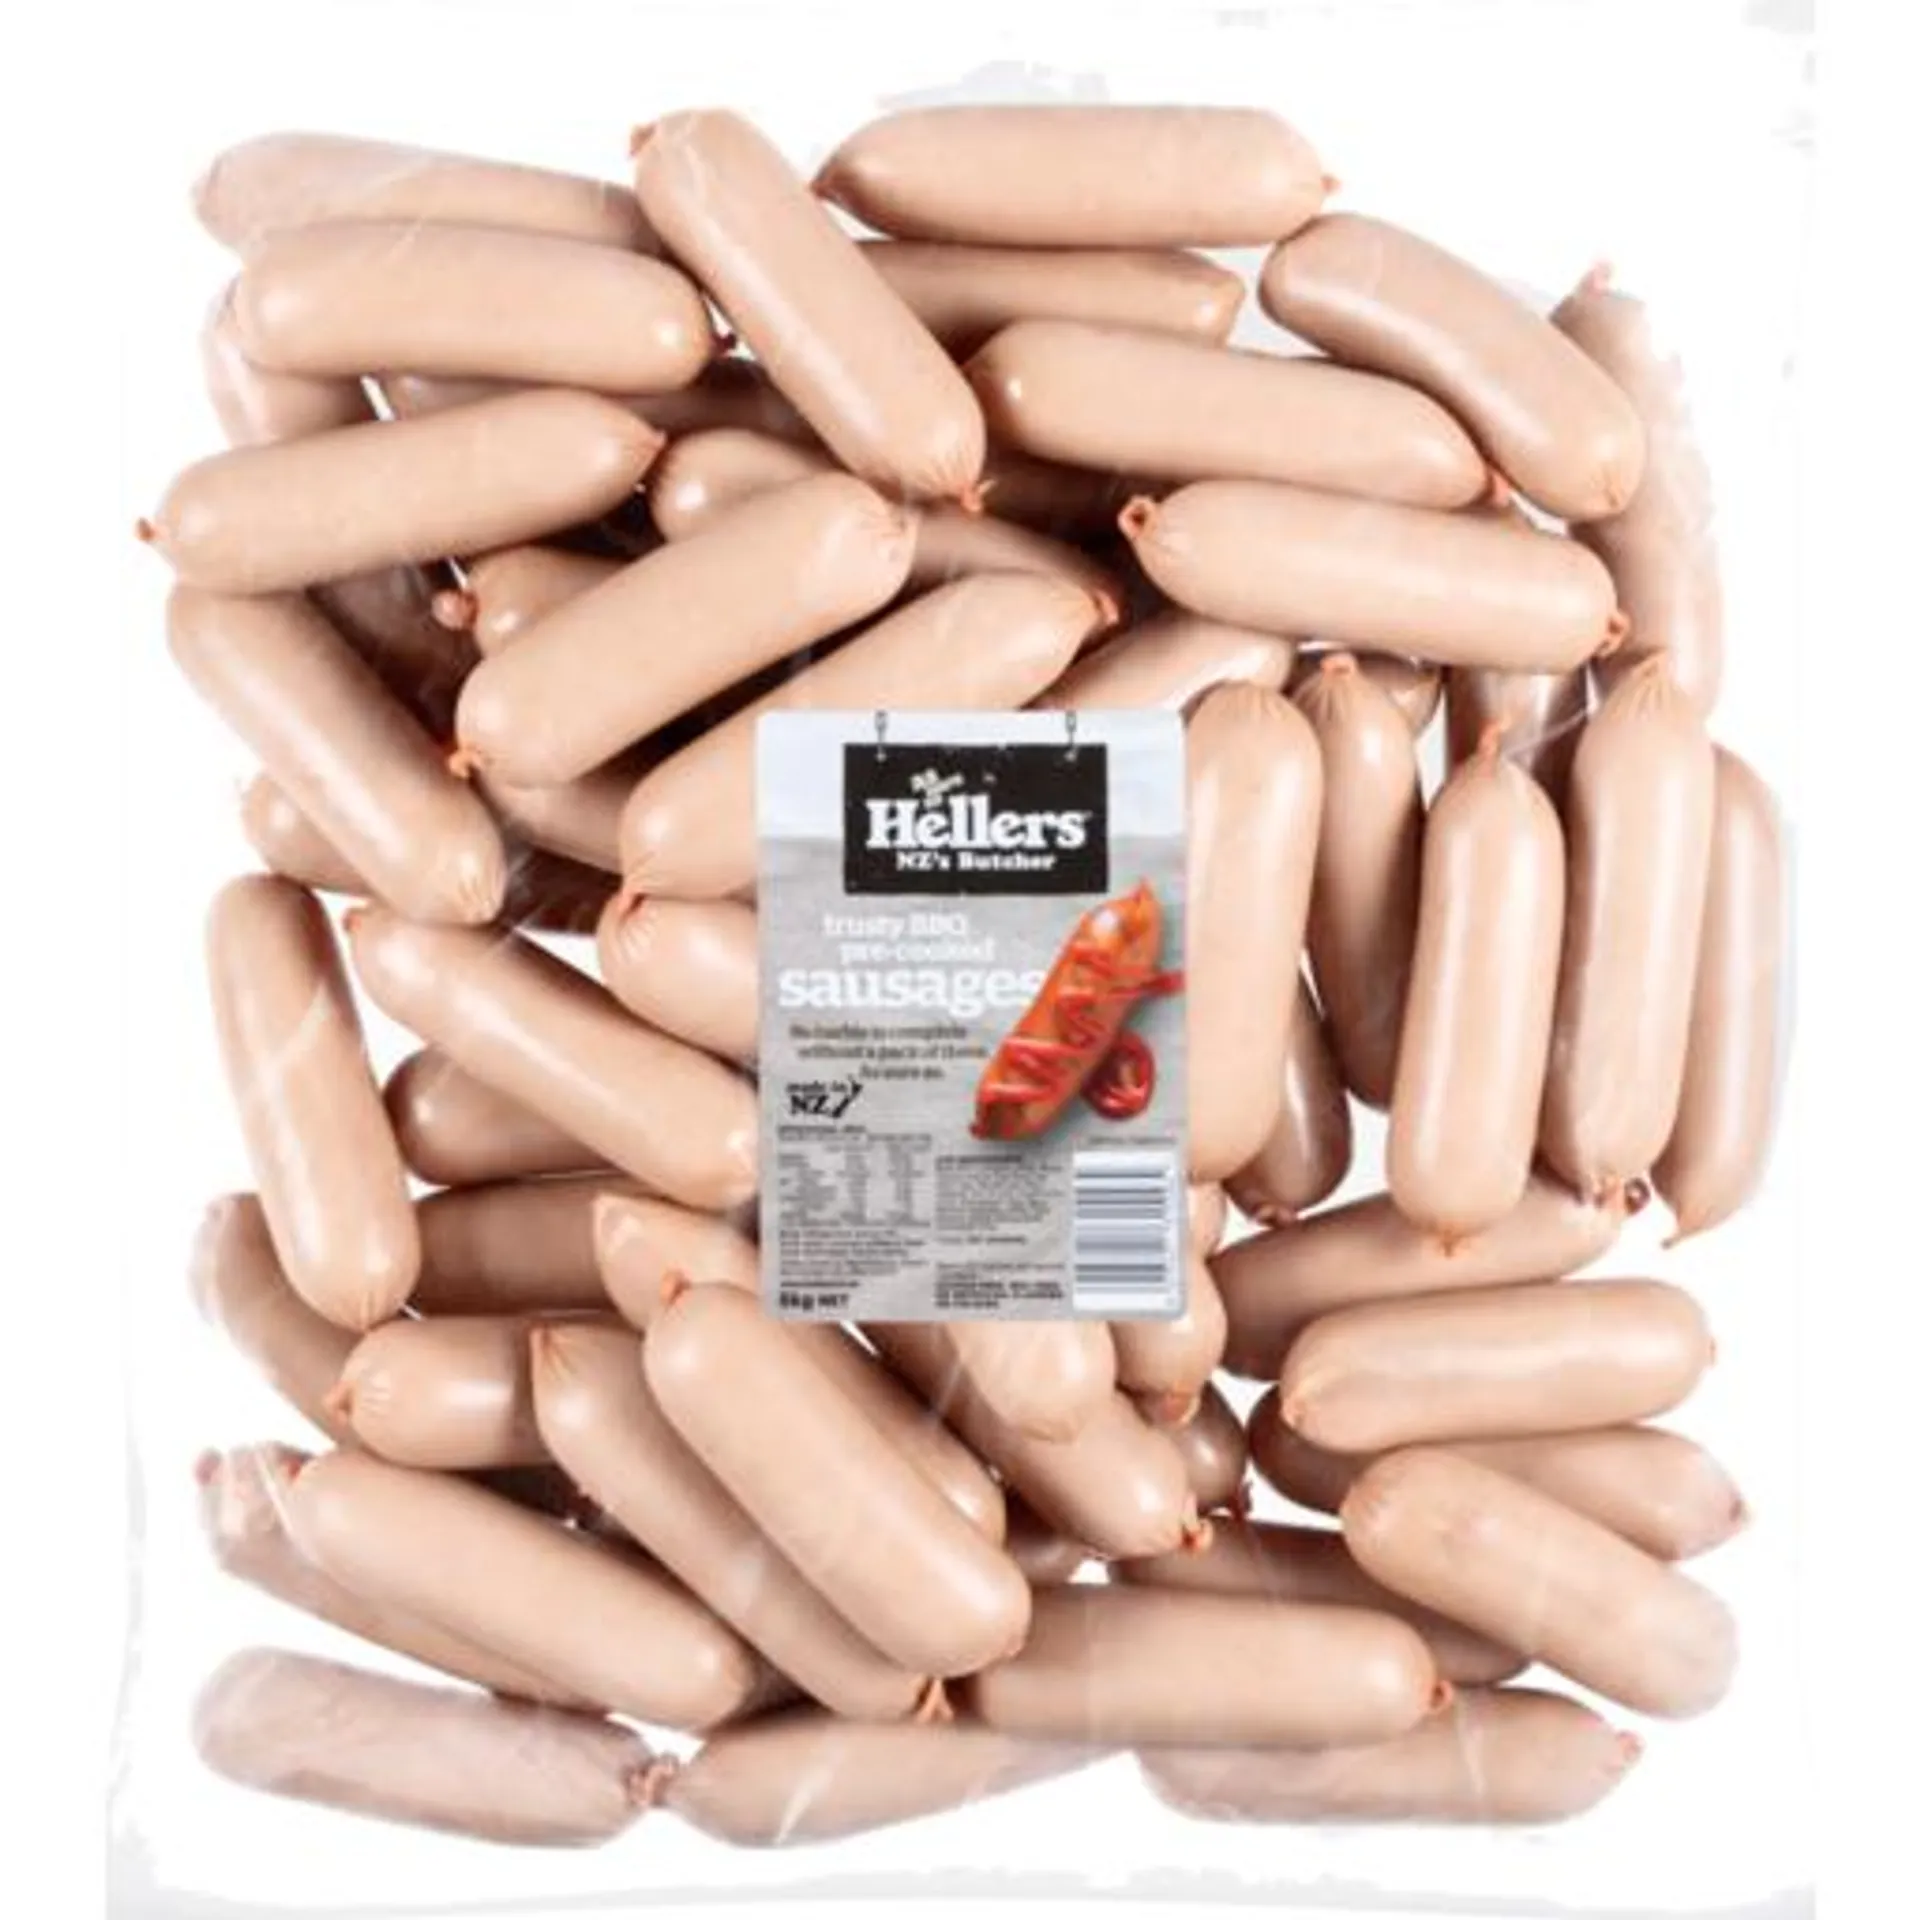 Hellers precooked sausages 5kg Two Day order time